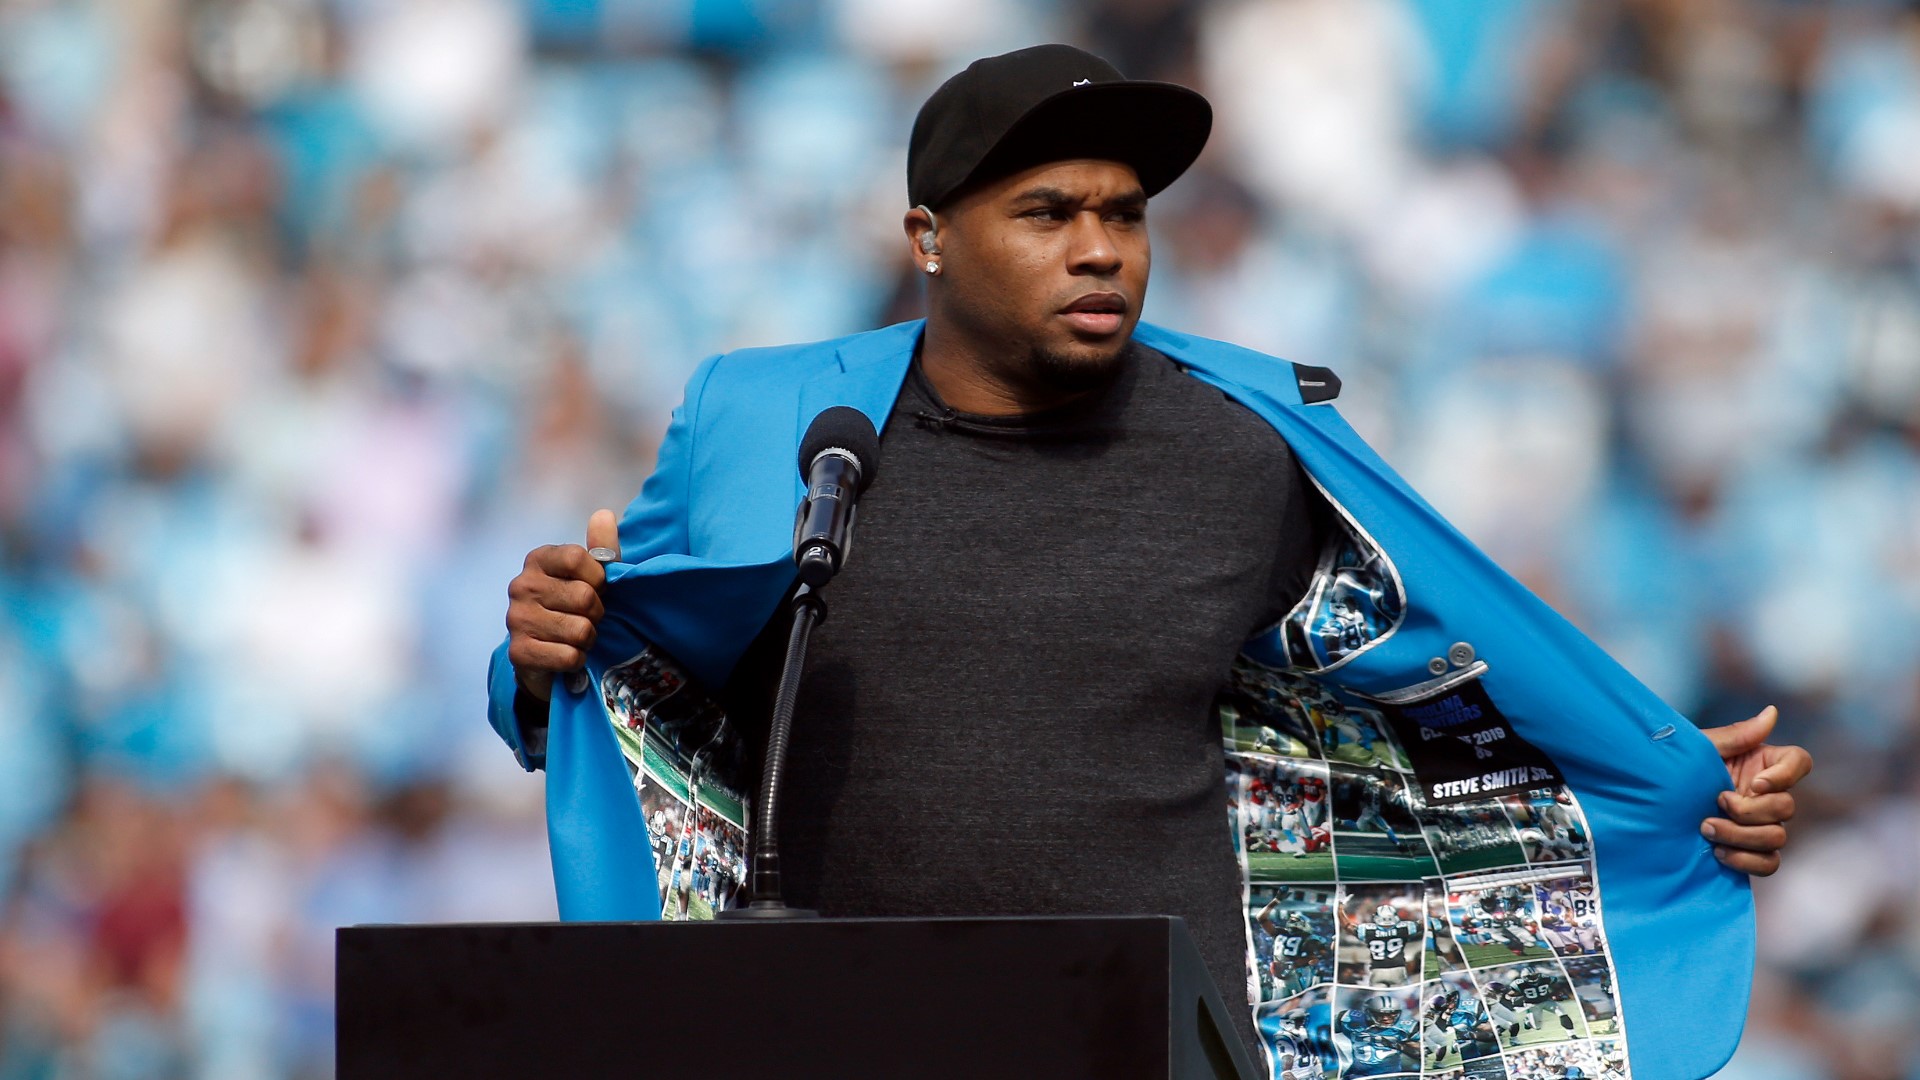 The Panthers inducted team icons Steve Smith, Jake Delhomme, Jordan Gross and Wesley Walls into the Hall of Honor during Sunday's game vs Jacksonville.